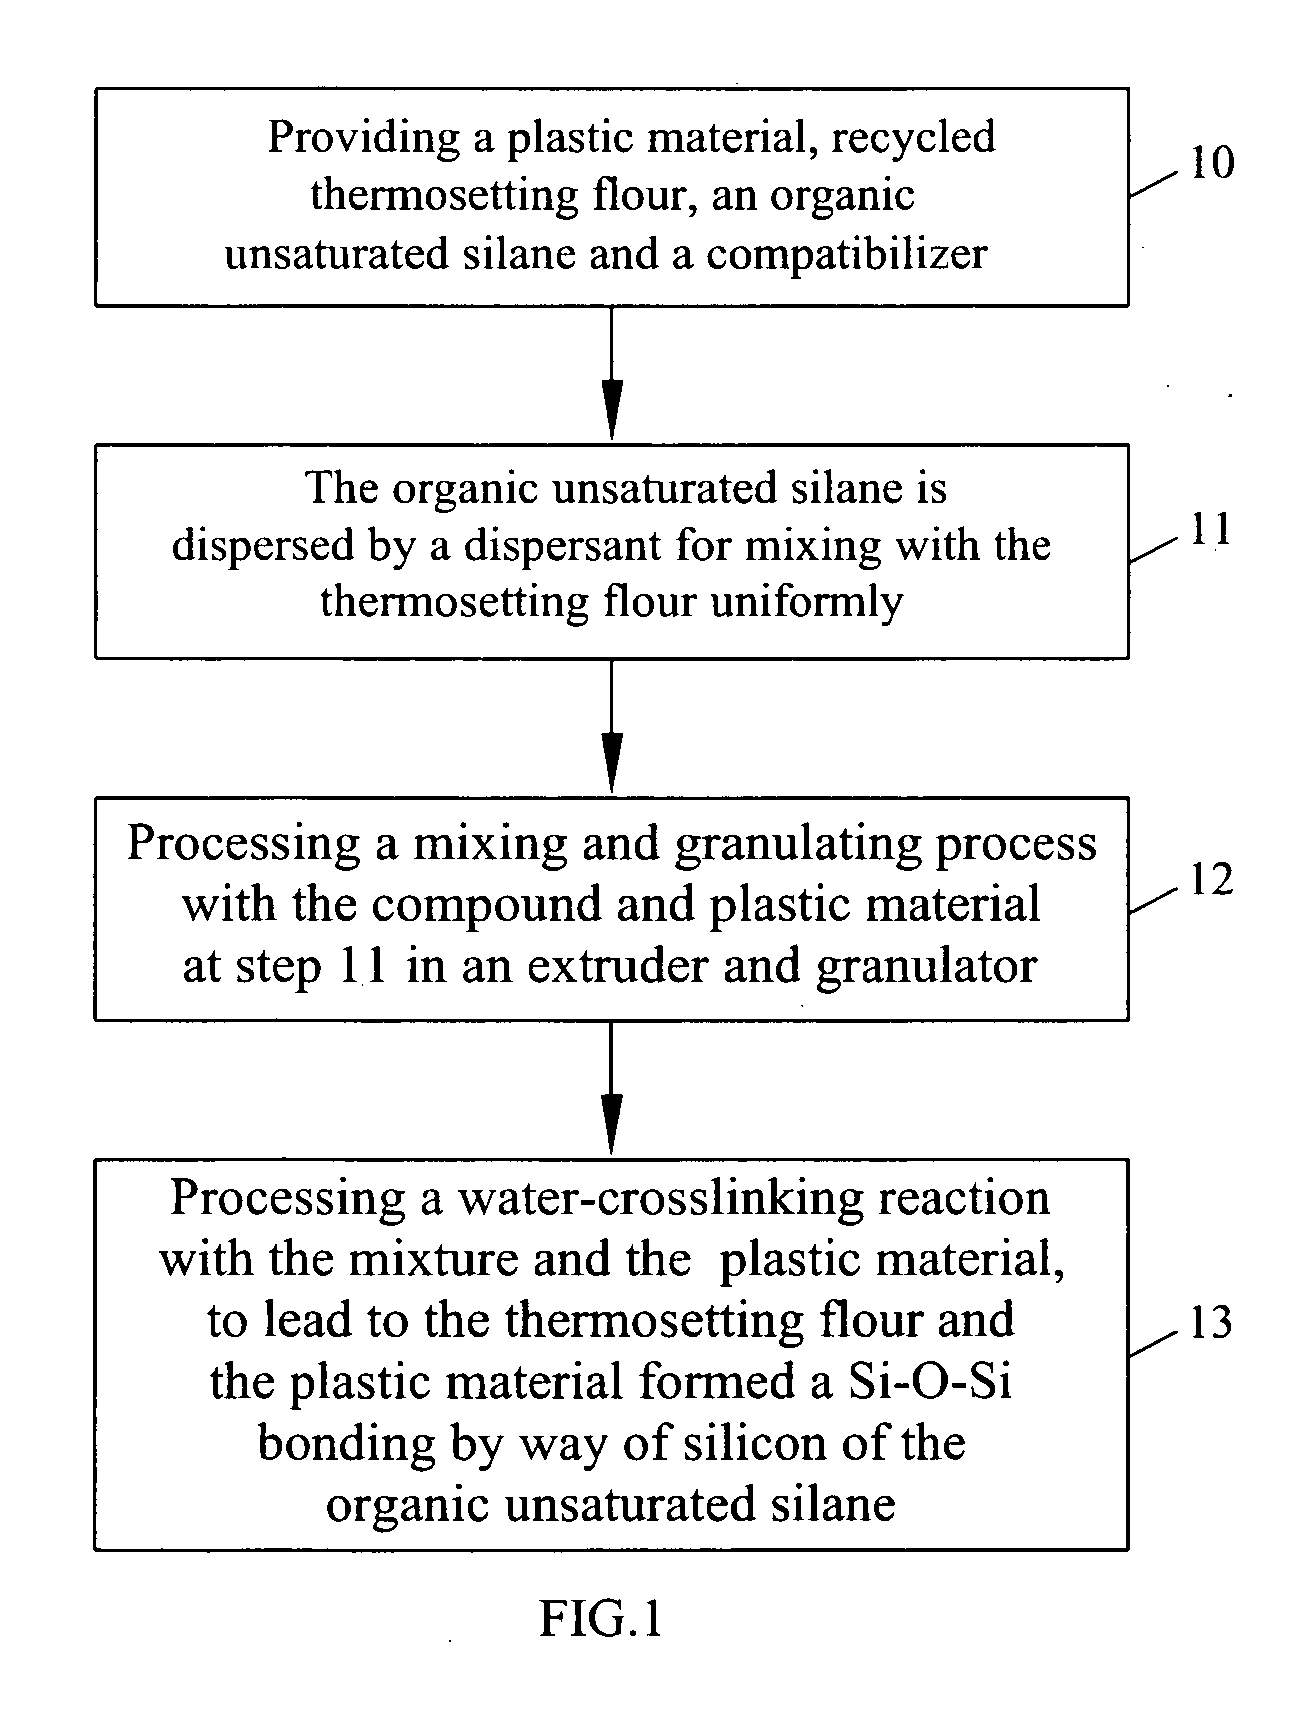 Recycled thermosetting flour composites and method for preparing the same